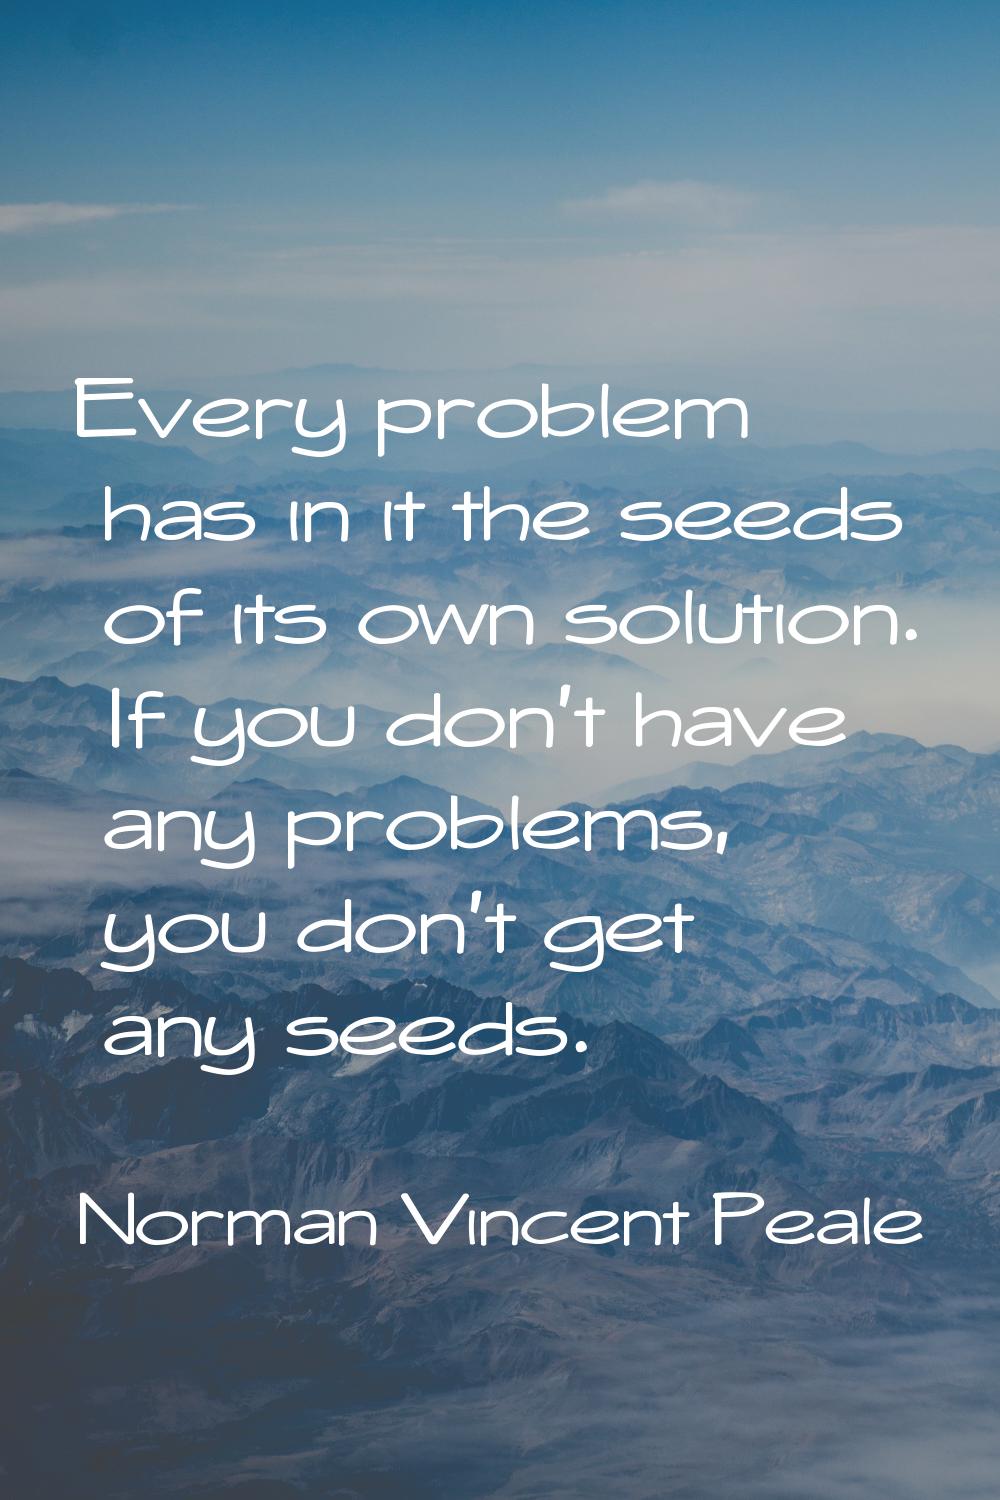 Every problem has in it the seeds of its own solution. If you don't have any problems, you don't ge